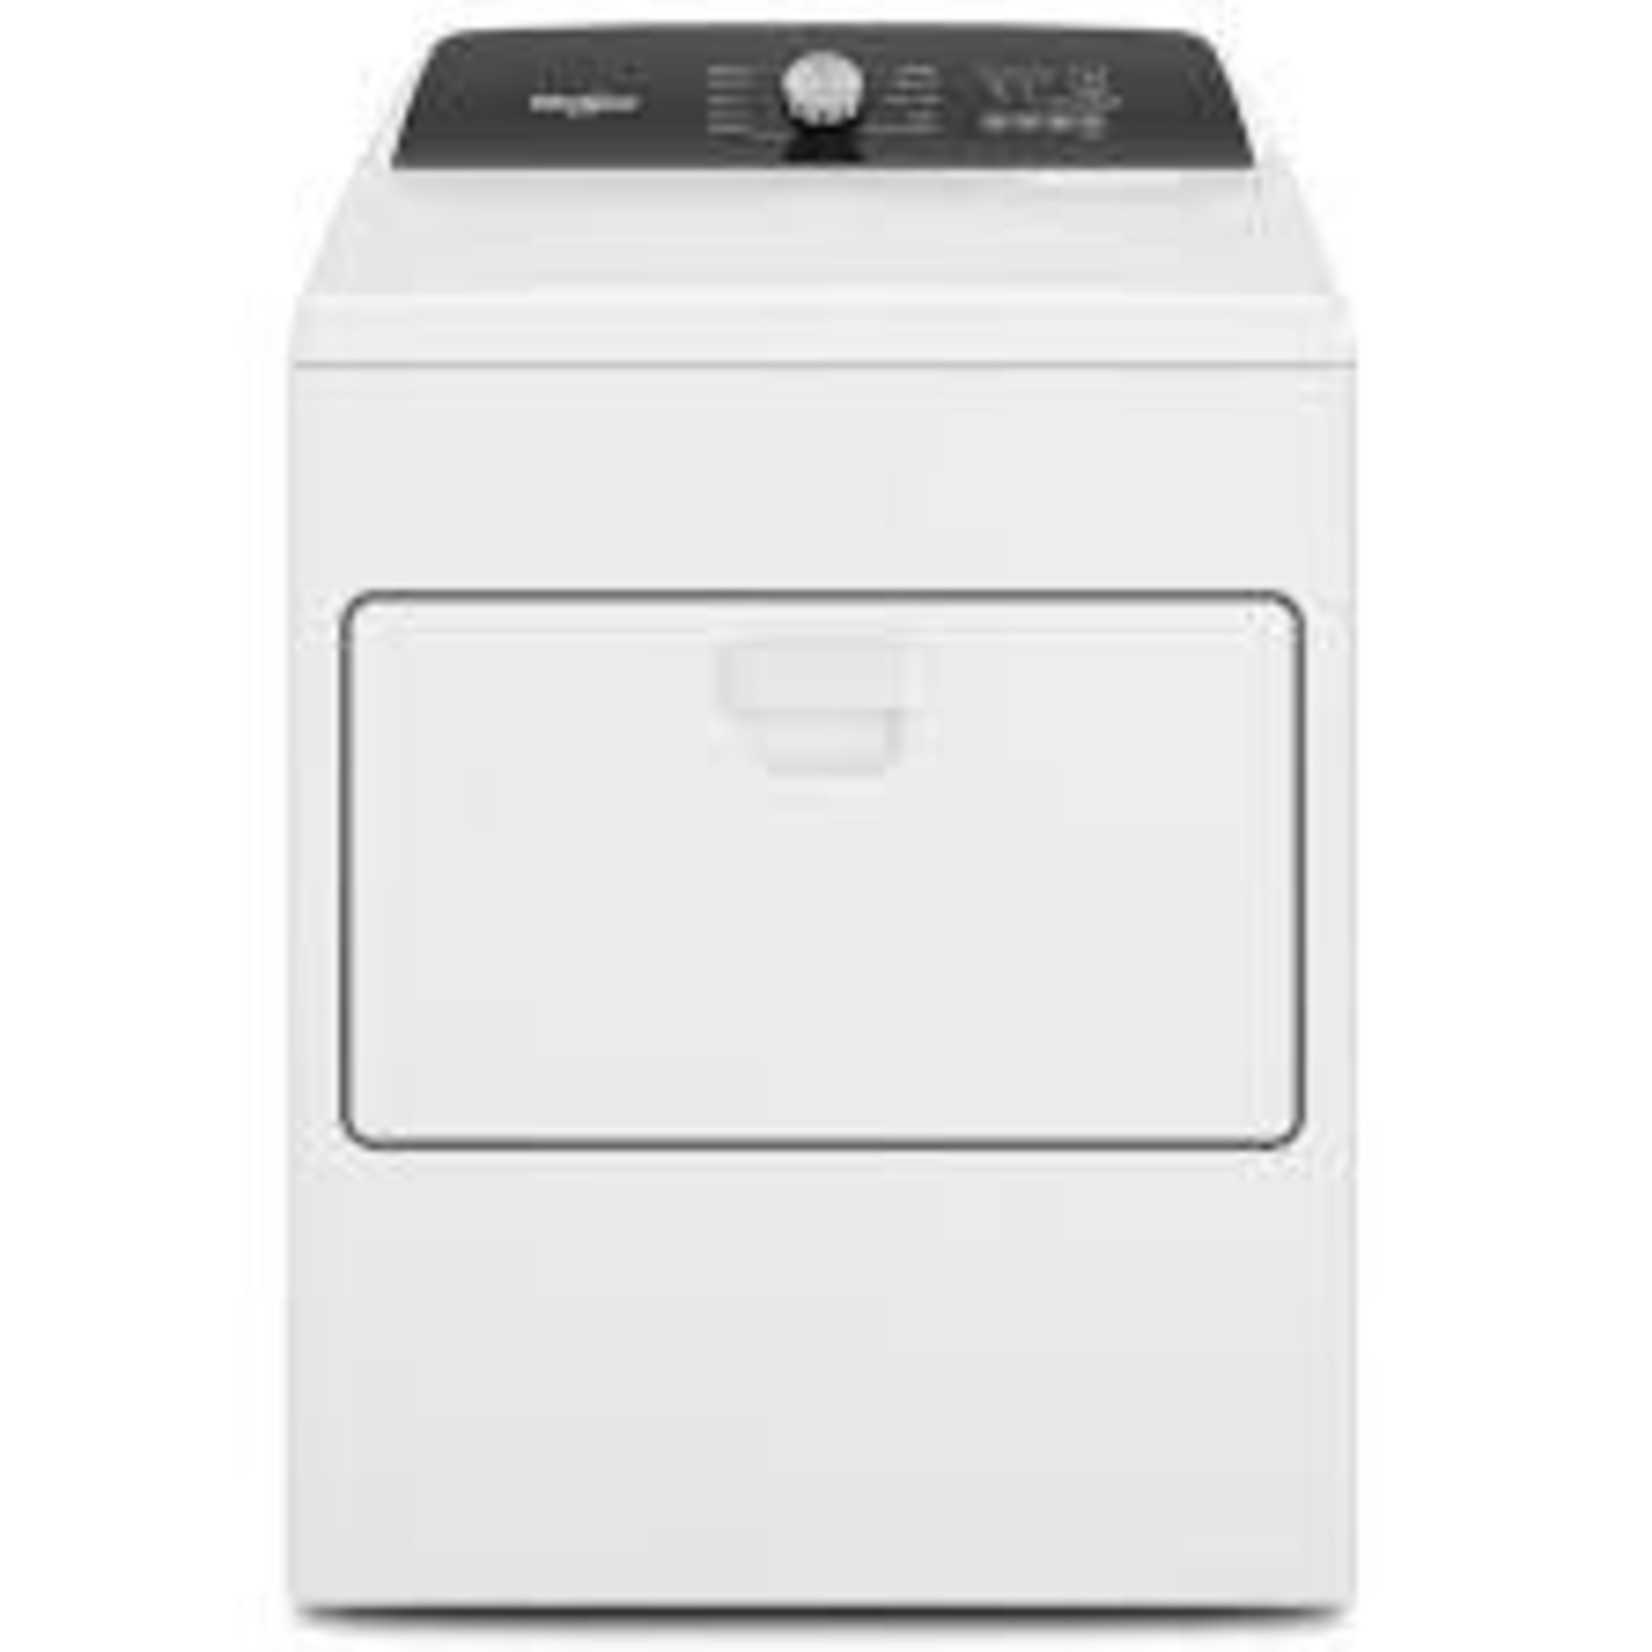 Whirlpool Whirlpool 29" Top Load Electric Dryer WED5010LW - MB0206165; NO CREDIT NEEDED FINANCE OPTIONS!!!